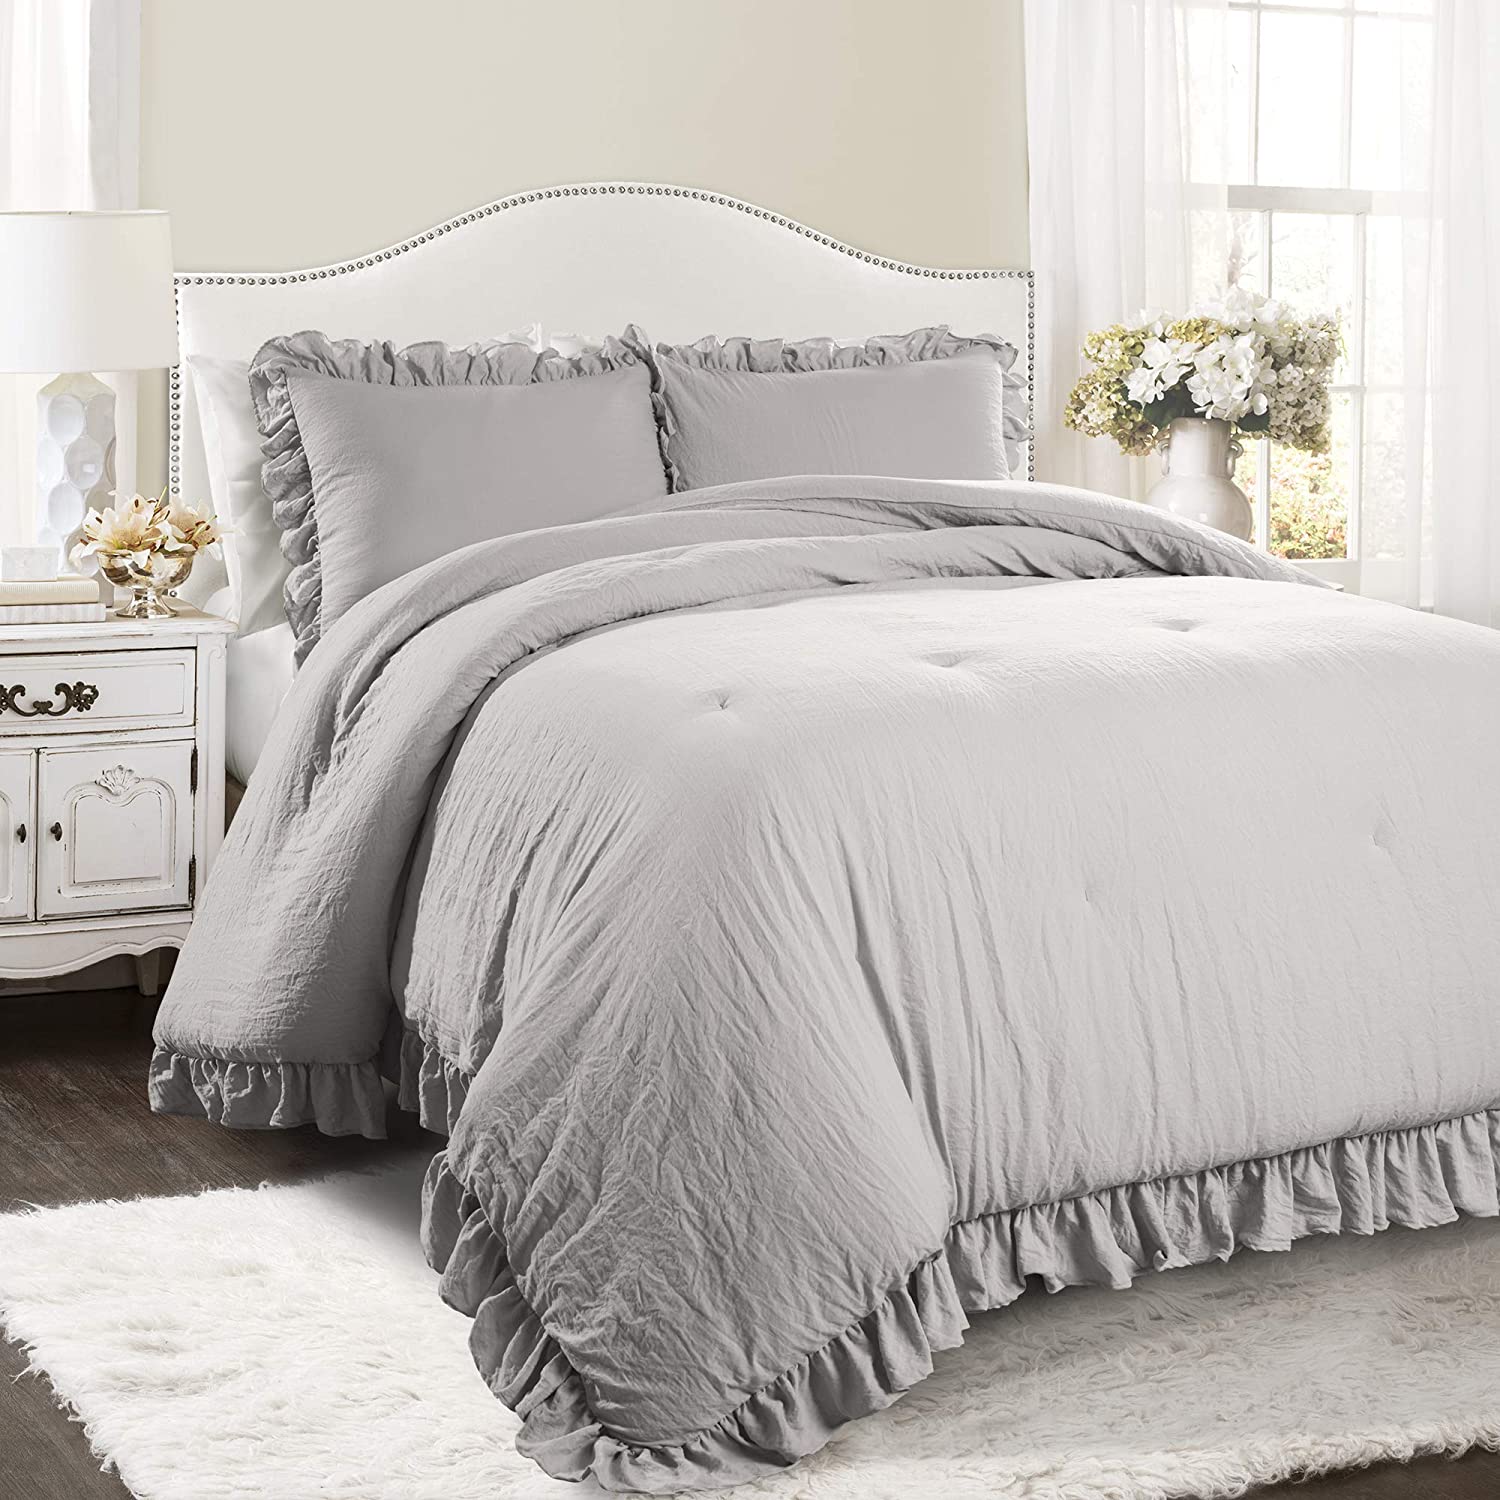 Details about   Lush Decor Reyna Comforter Ruffled 3 Piece Bedding Set with Pillow Shams King, 